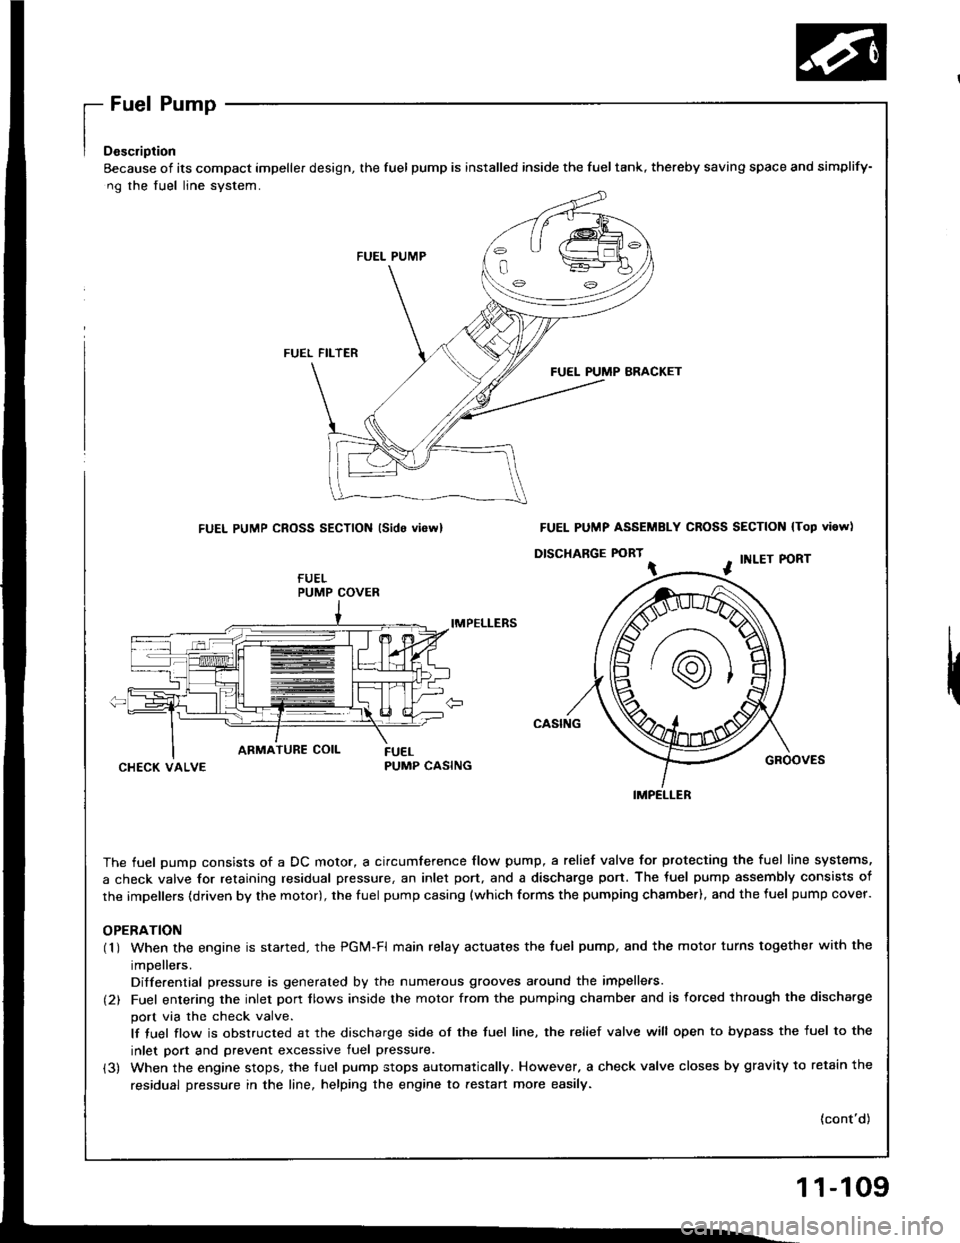 HONDA INTEGRA 1994 4.G Workshop Manual [":::,::-
Eecause of its compact impeller design, the fuel pump is installed inside the fueltank, thereby saving space
ng the fuel line system.
FUEL PUMP
FUEL FILTER
FUEL PUMP BRACKET
FUEL PUMP CROSS